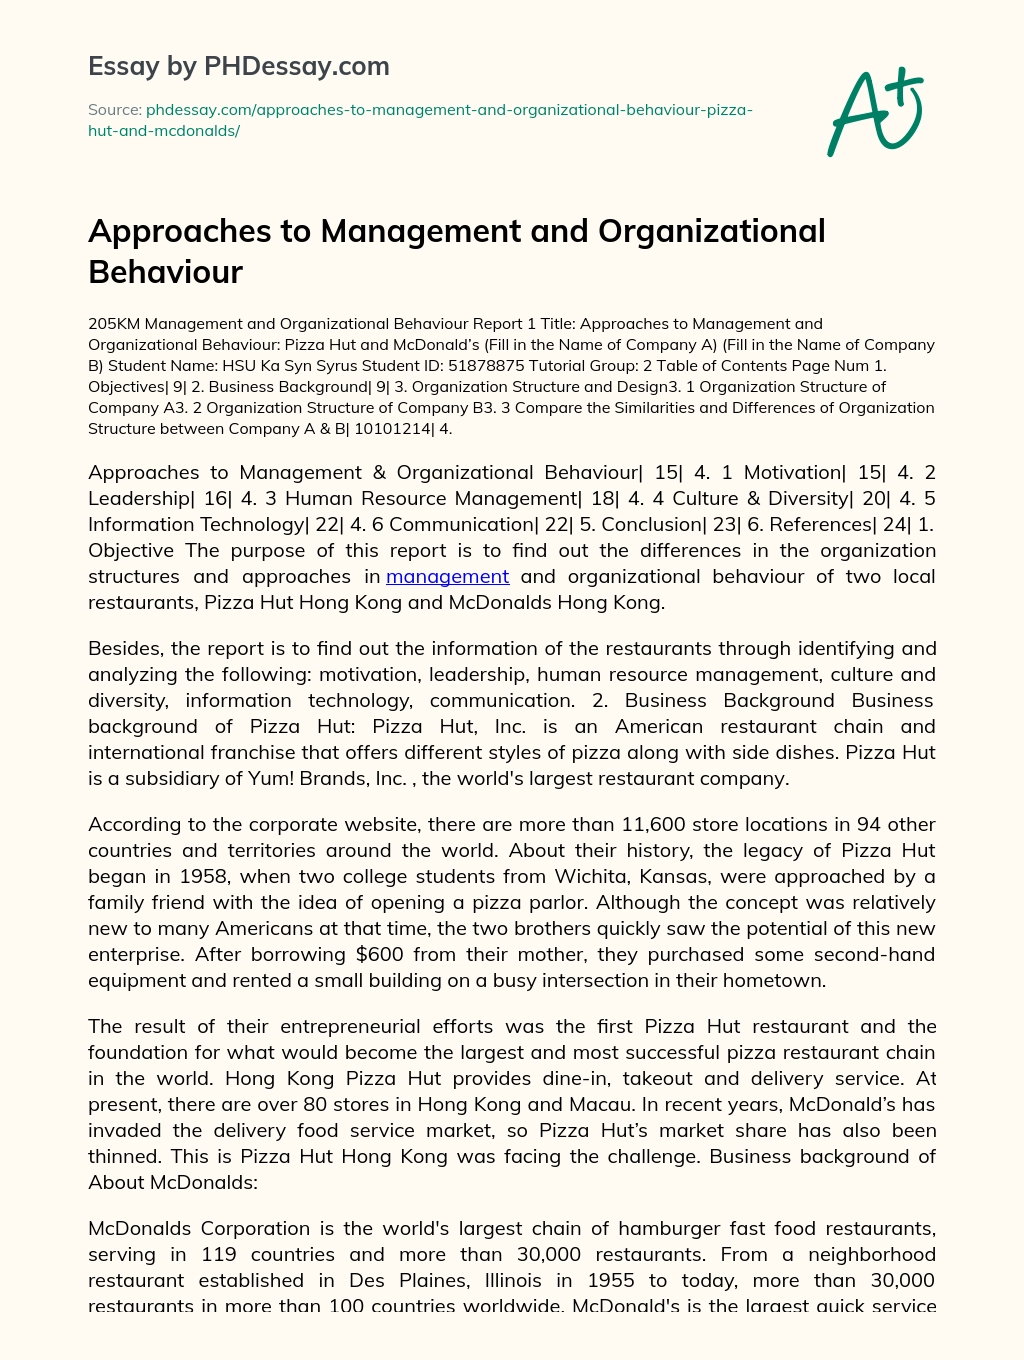 Approaches to Management and Organizational Behaviour essay